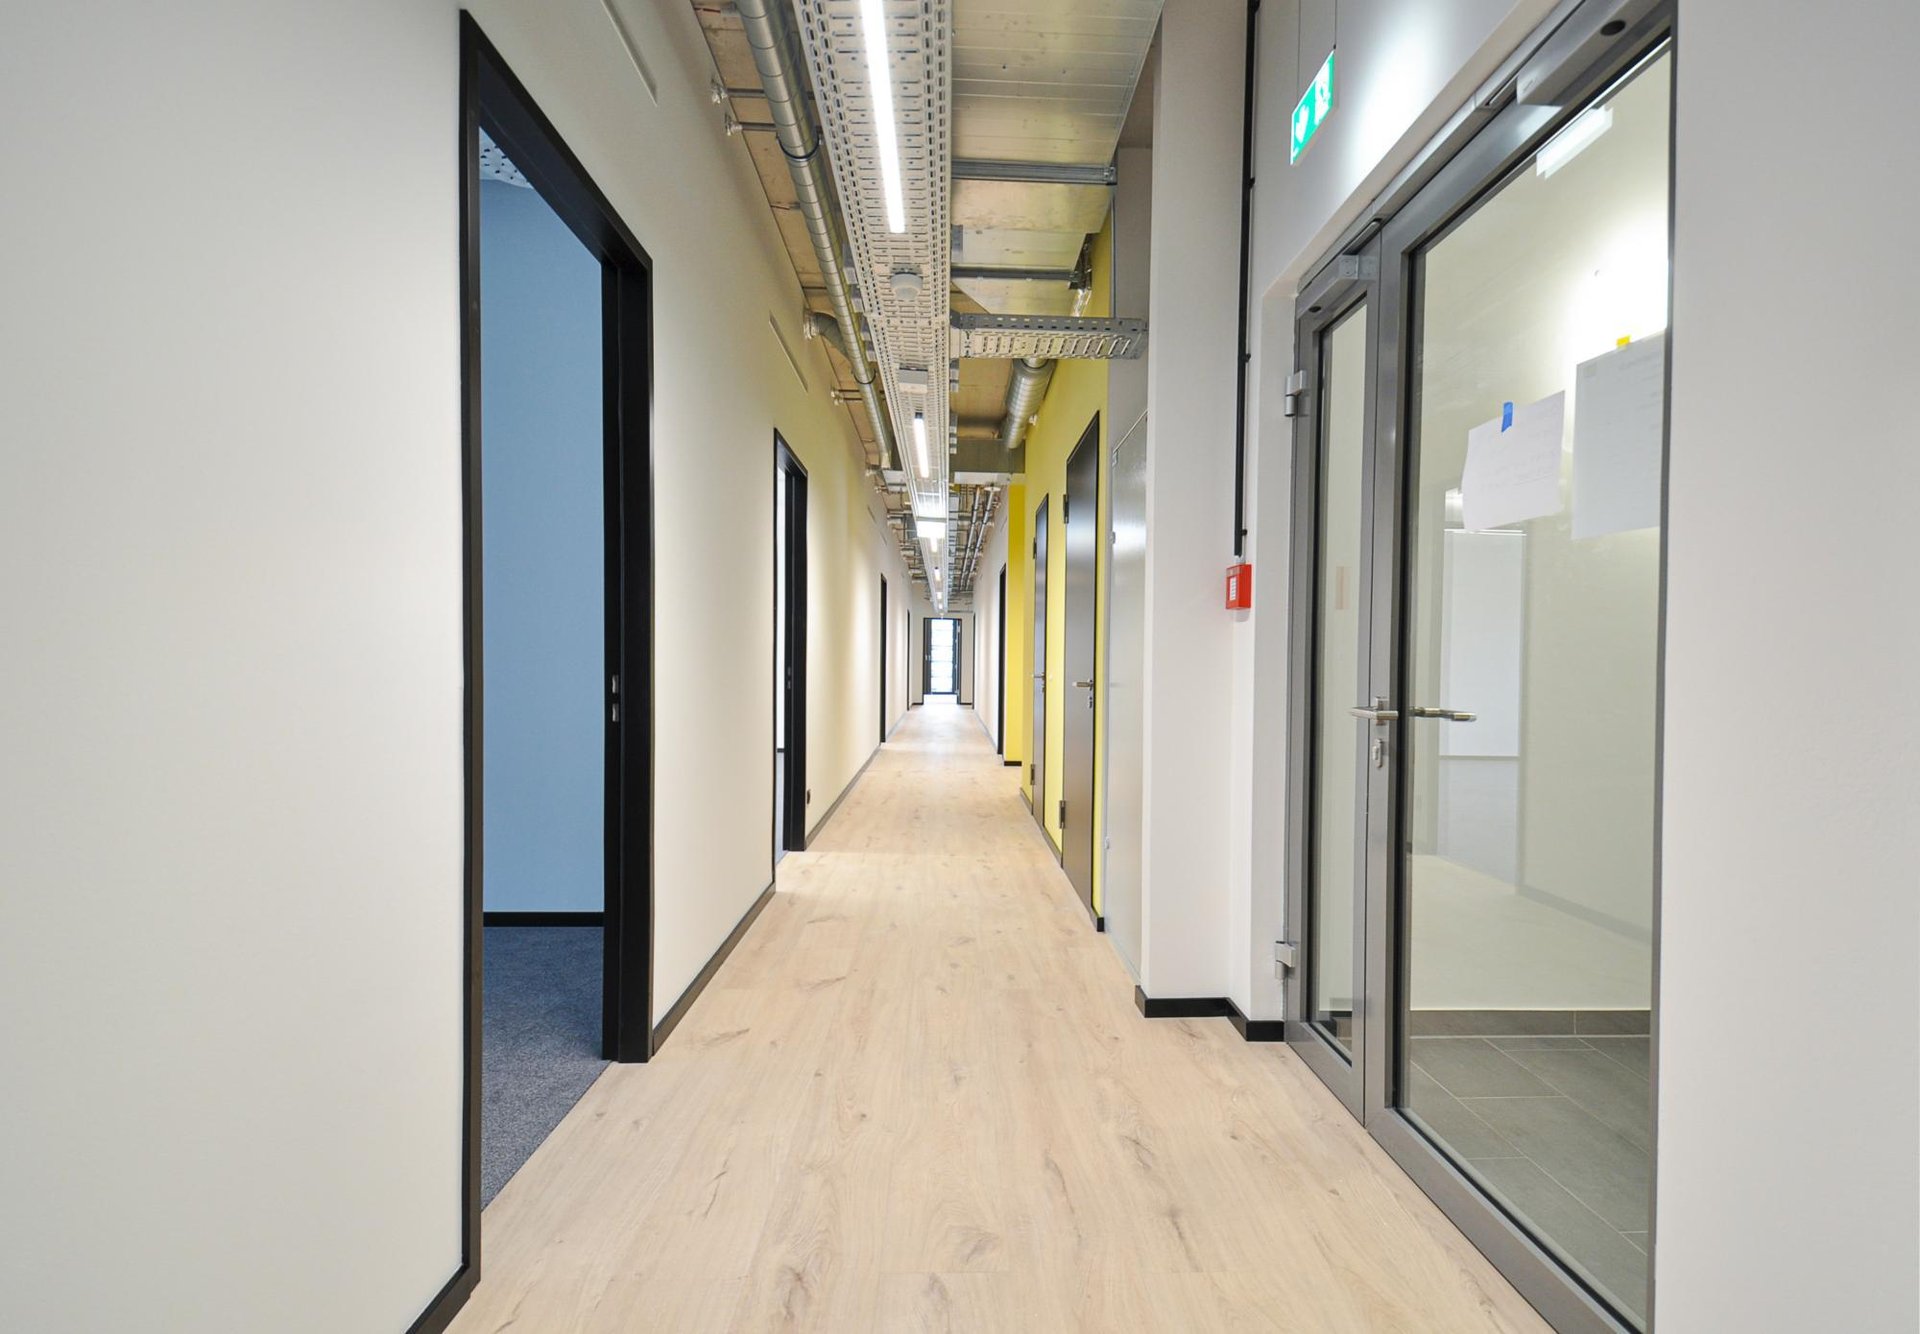 Interior of Scaling Spaces at Cuvry Campus